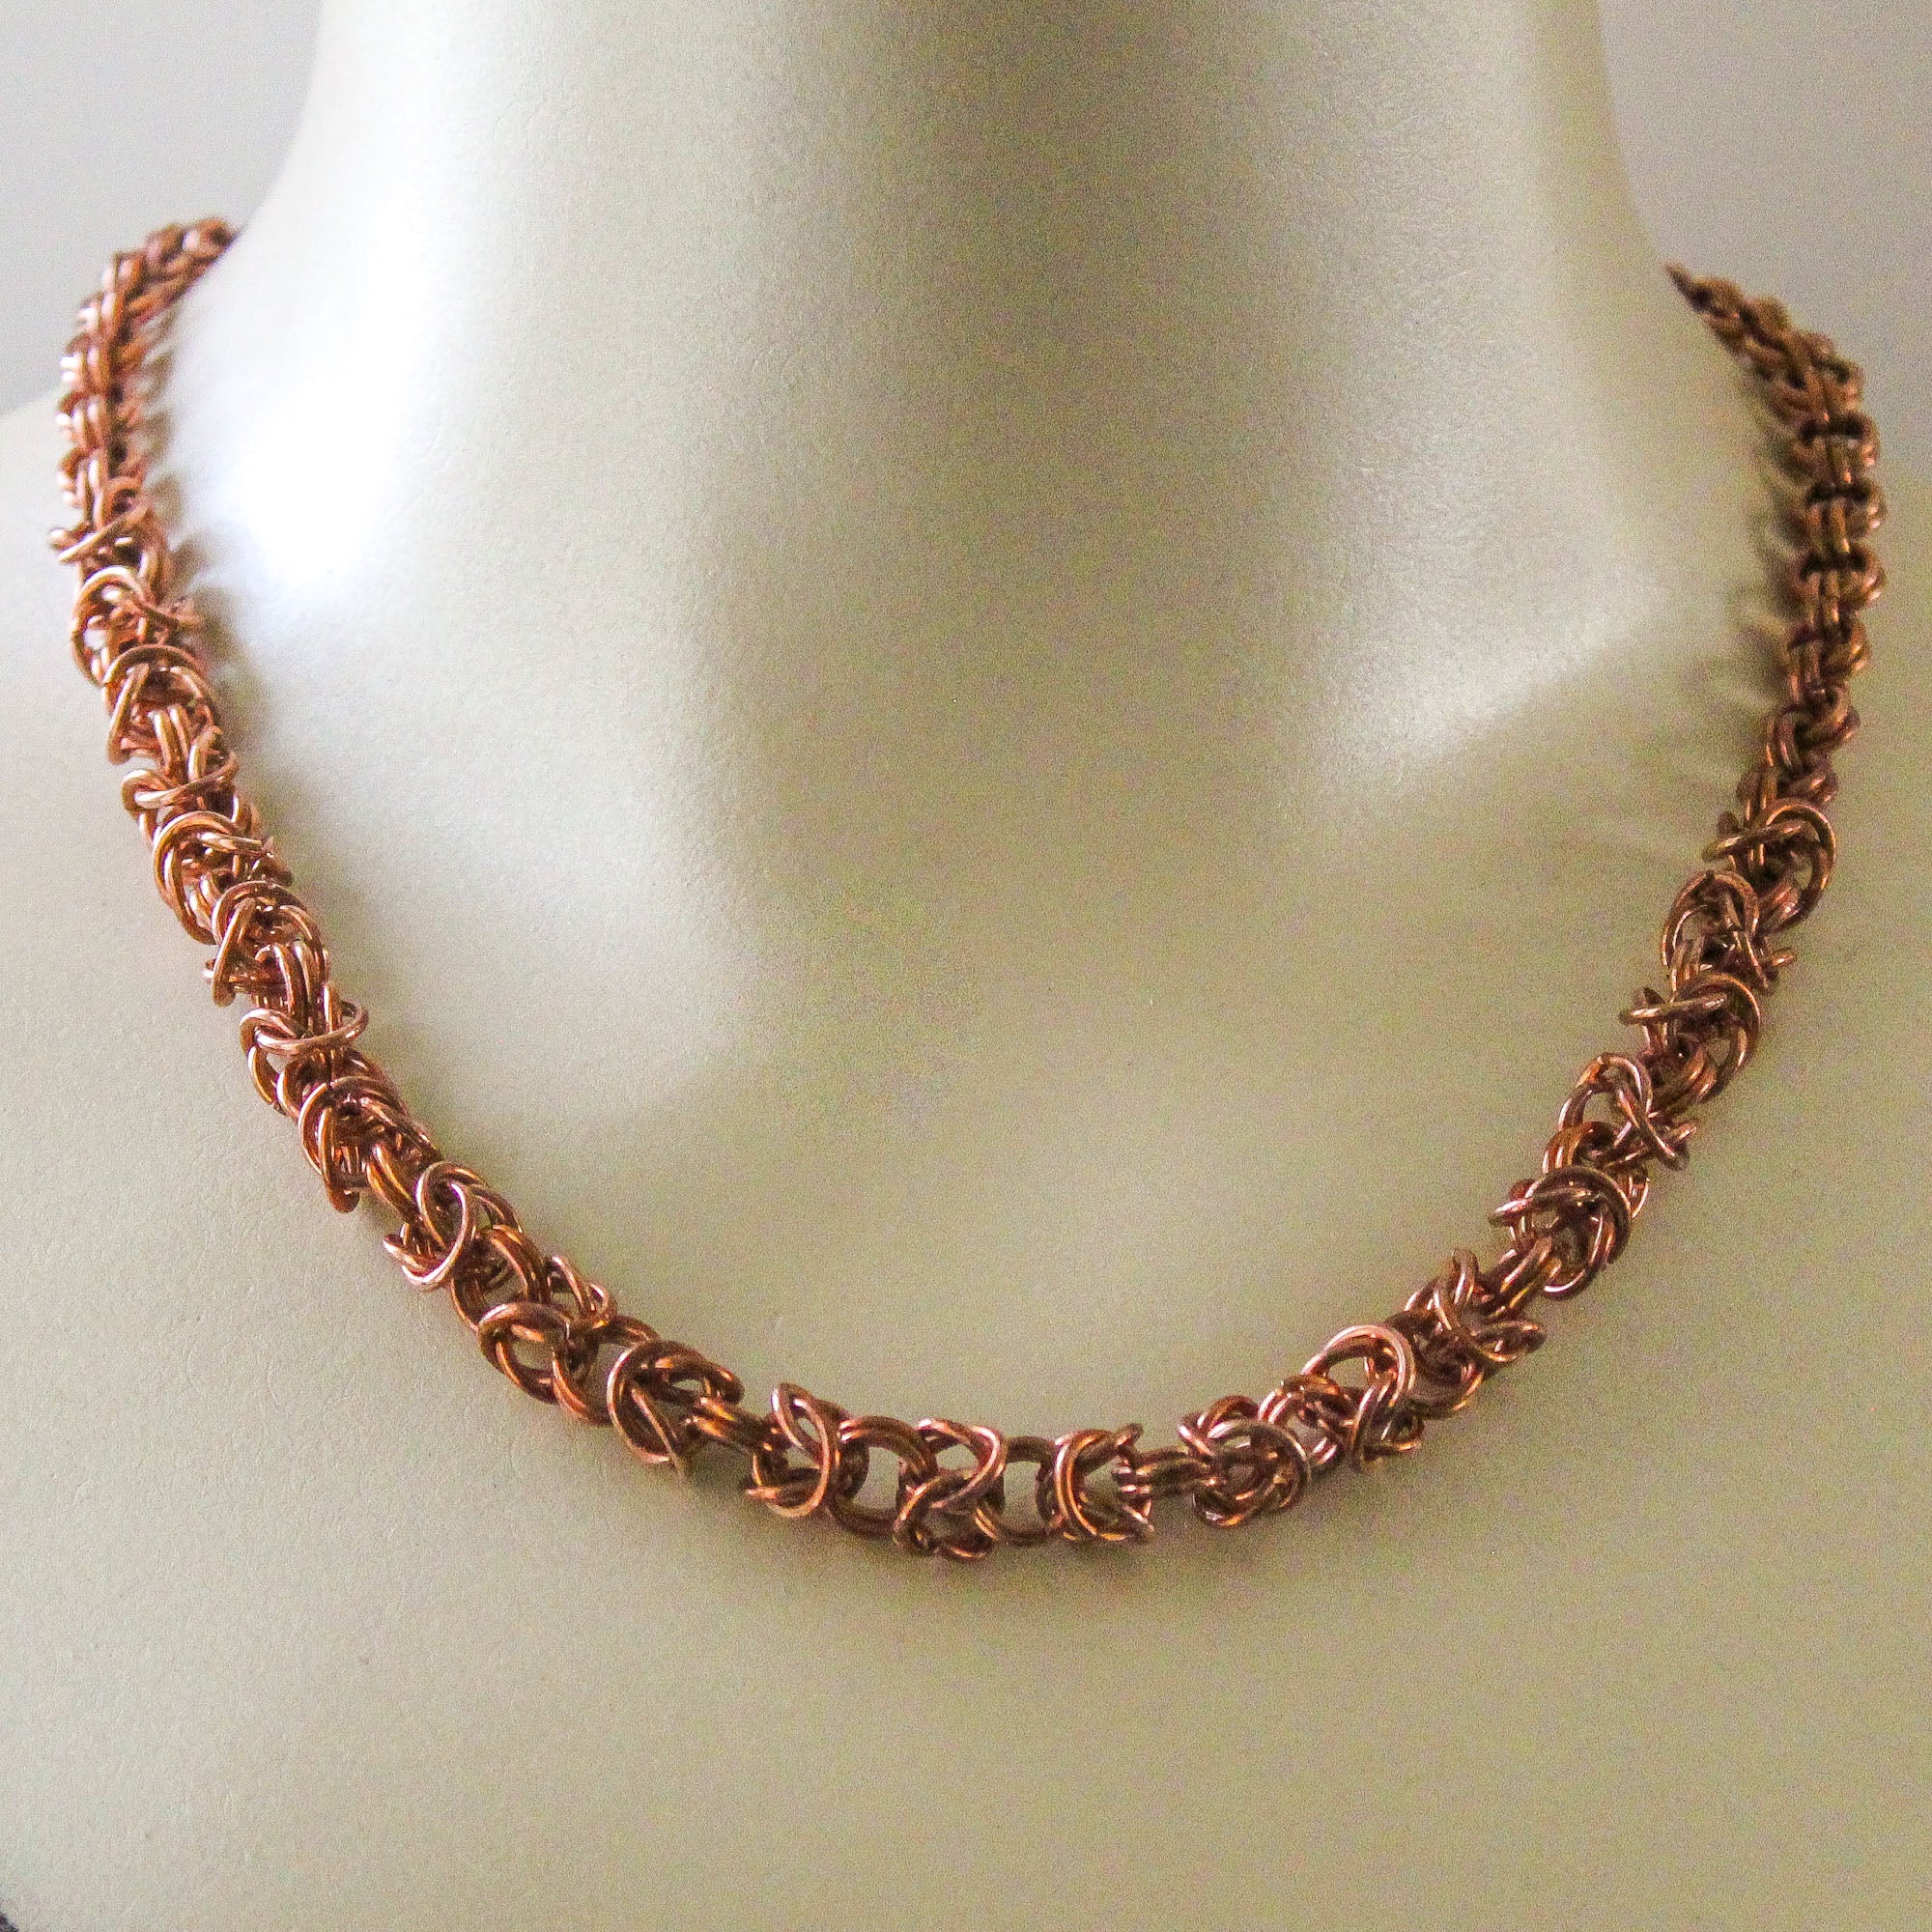 Unisex Chain Maille Necklace